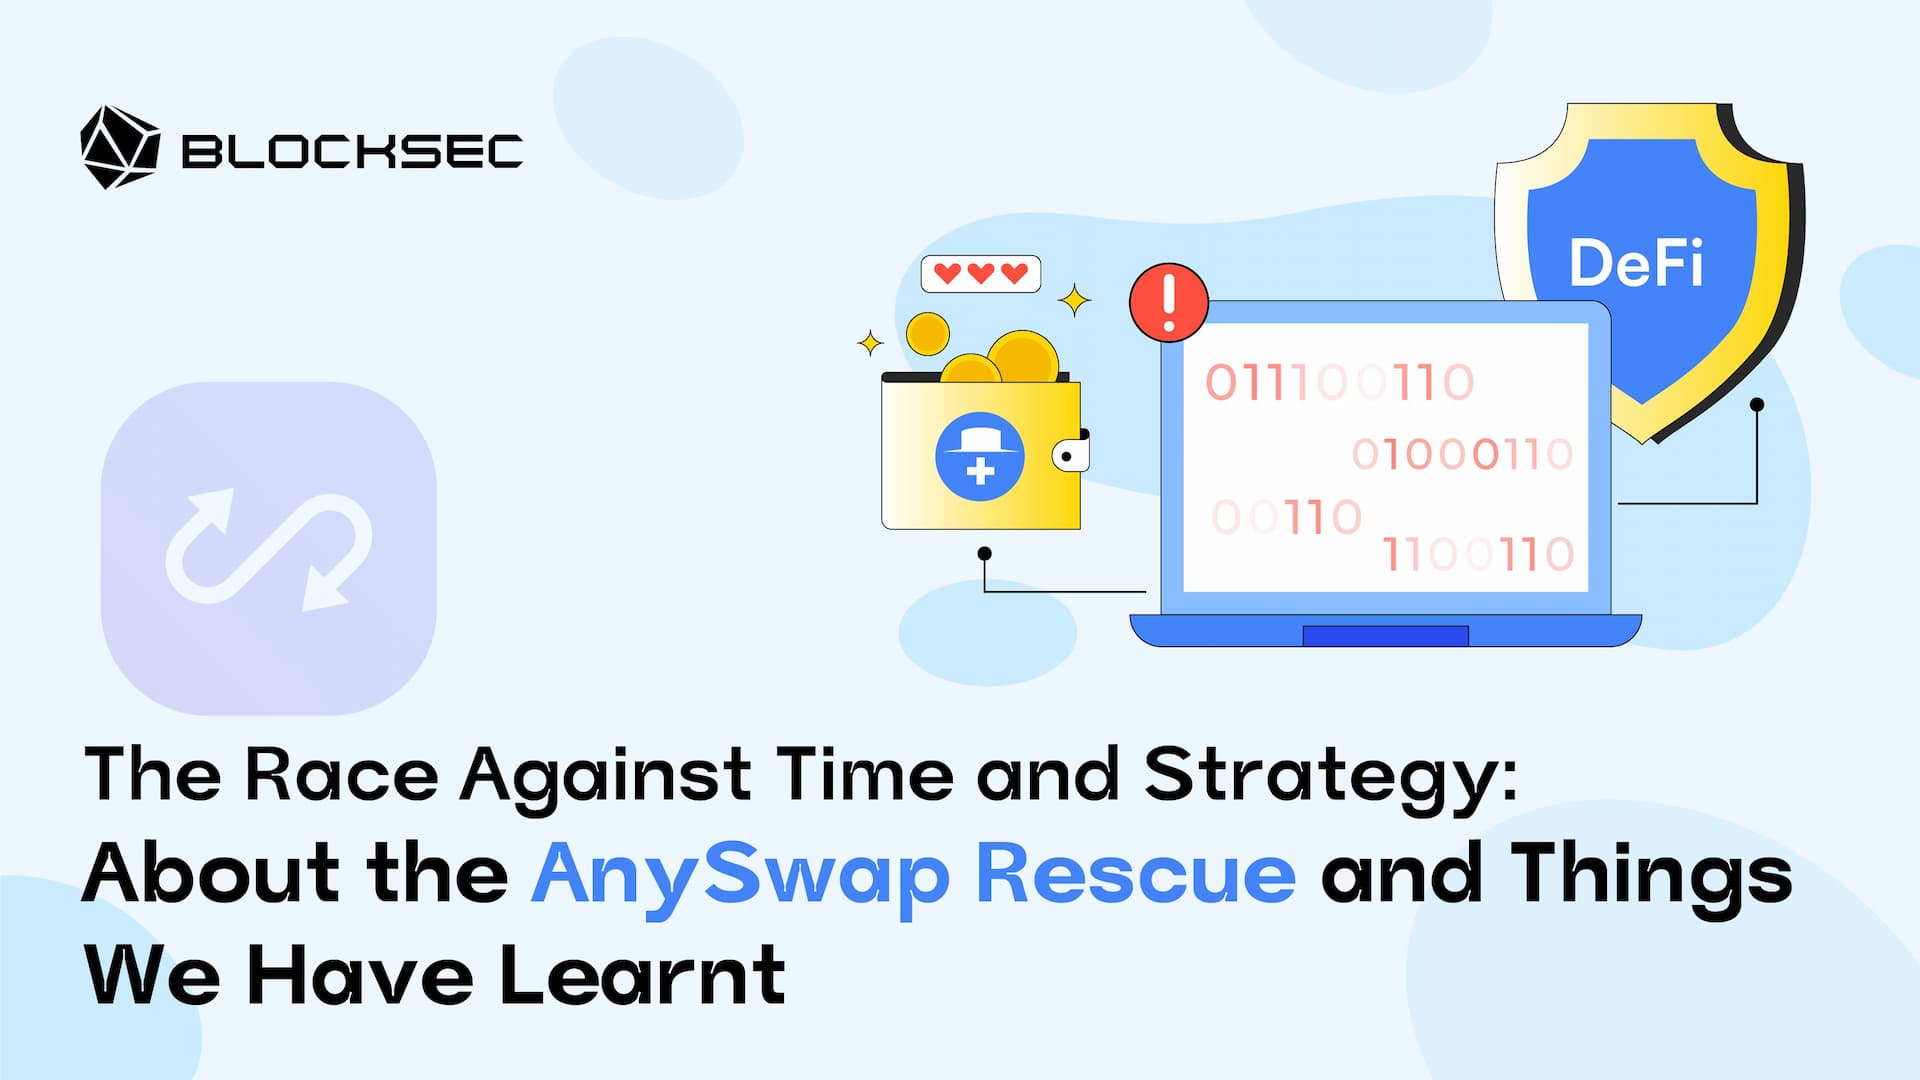 The Race Against Time and Strategy: About the AnySwap Rescue and Things We Have Learnt